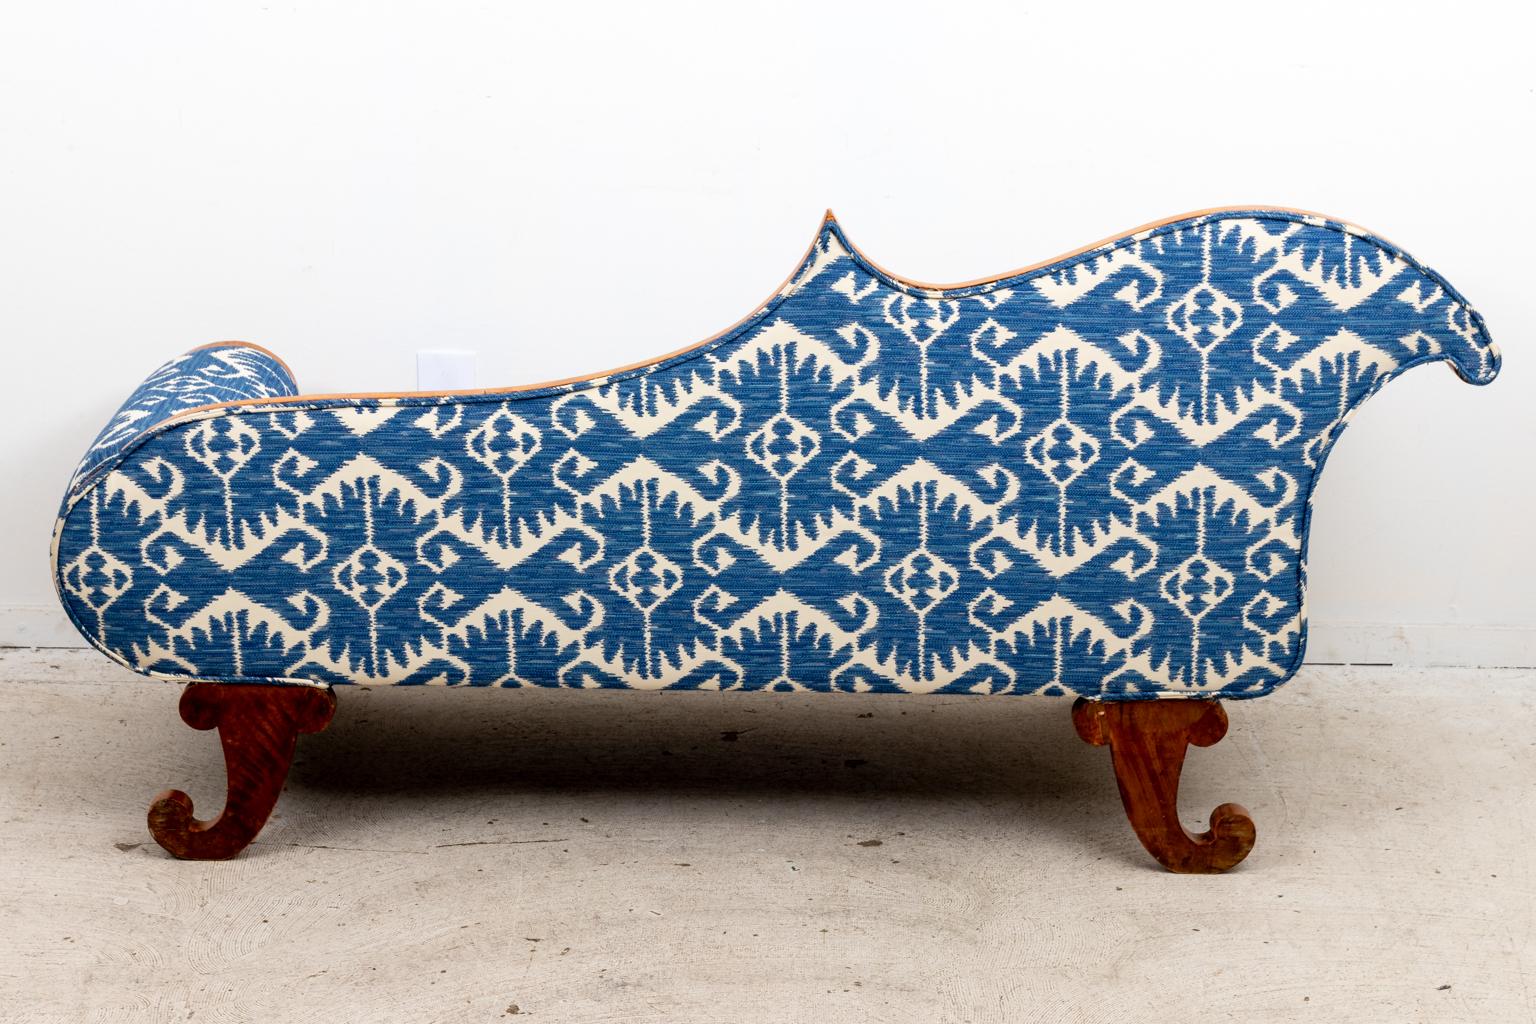 Blue and white upholstered Biedermeier style chaise lounge chair with scrolled arms and an asymmetrical, curved seat back. The legs are carved in the outline of cornucopia baskets. Please note of wear consistent with age including finish loss,